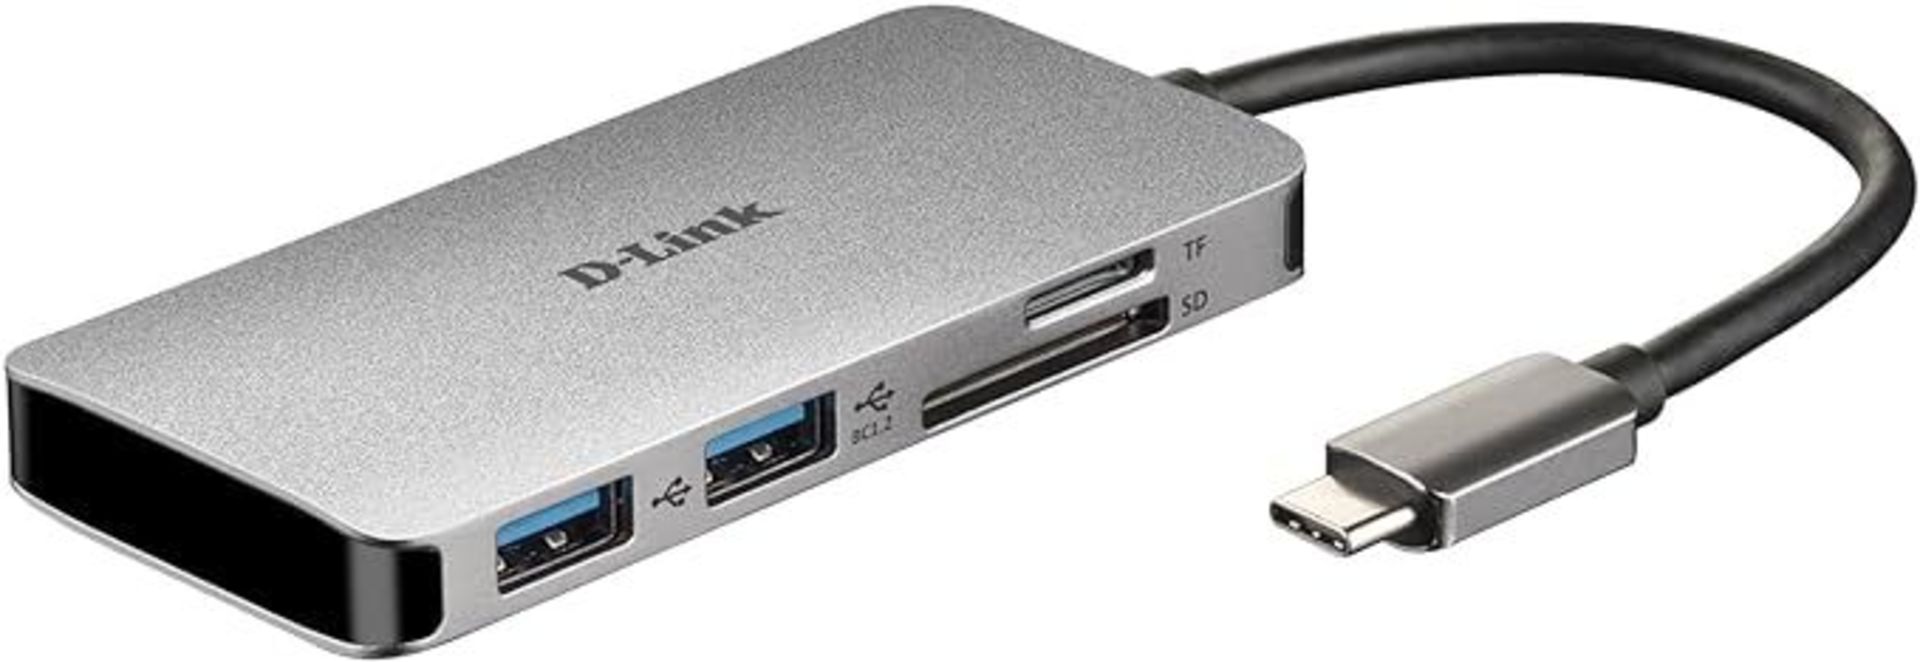 D-Link DUB-M610 6-in-1 USB-C Hub with Power Delivery, HDMI 1.4, 2 USB 3.0 Ports, SD/MicroSD Card